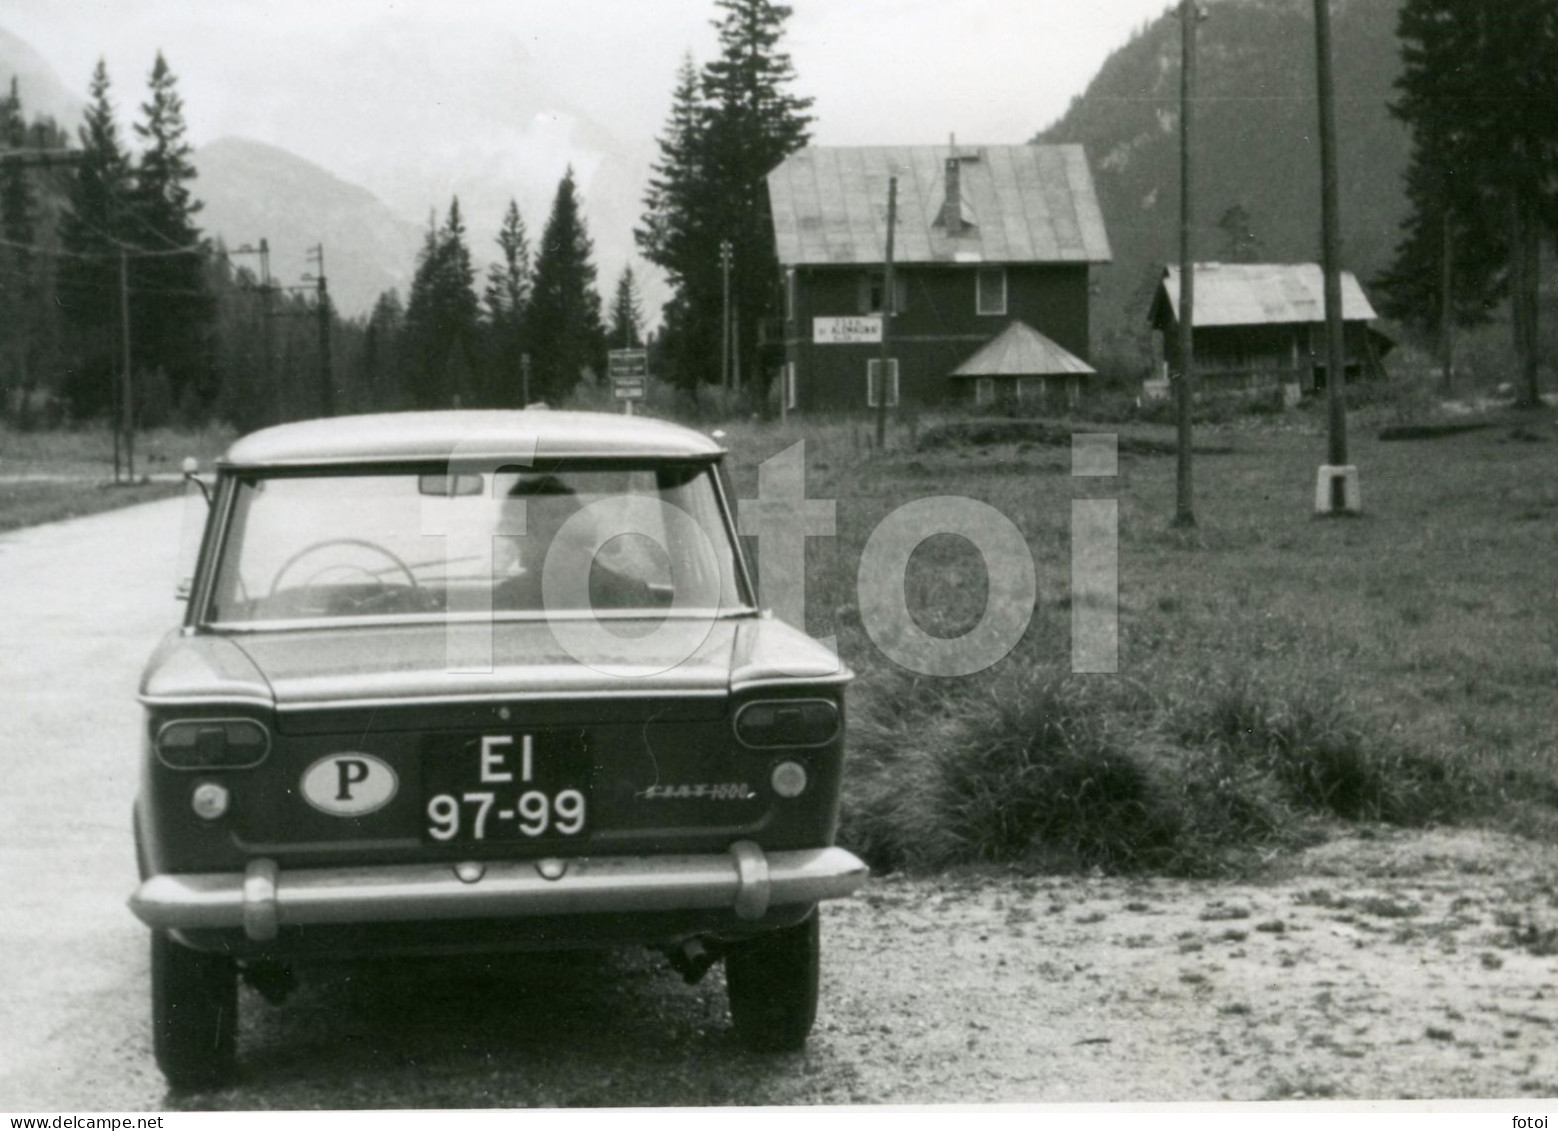 1965 REAL PHOTO FOTO FIAT 1500 CAR TRAVELLING EUROPE DEUTSCHLAND AT155 - Coches